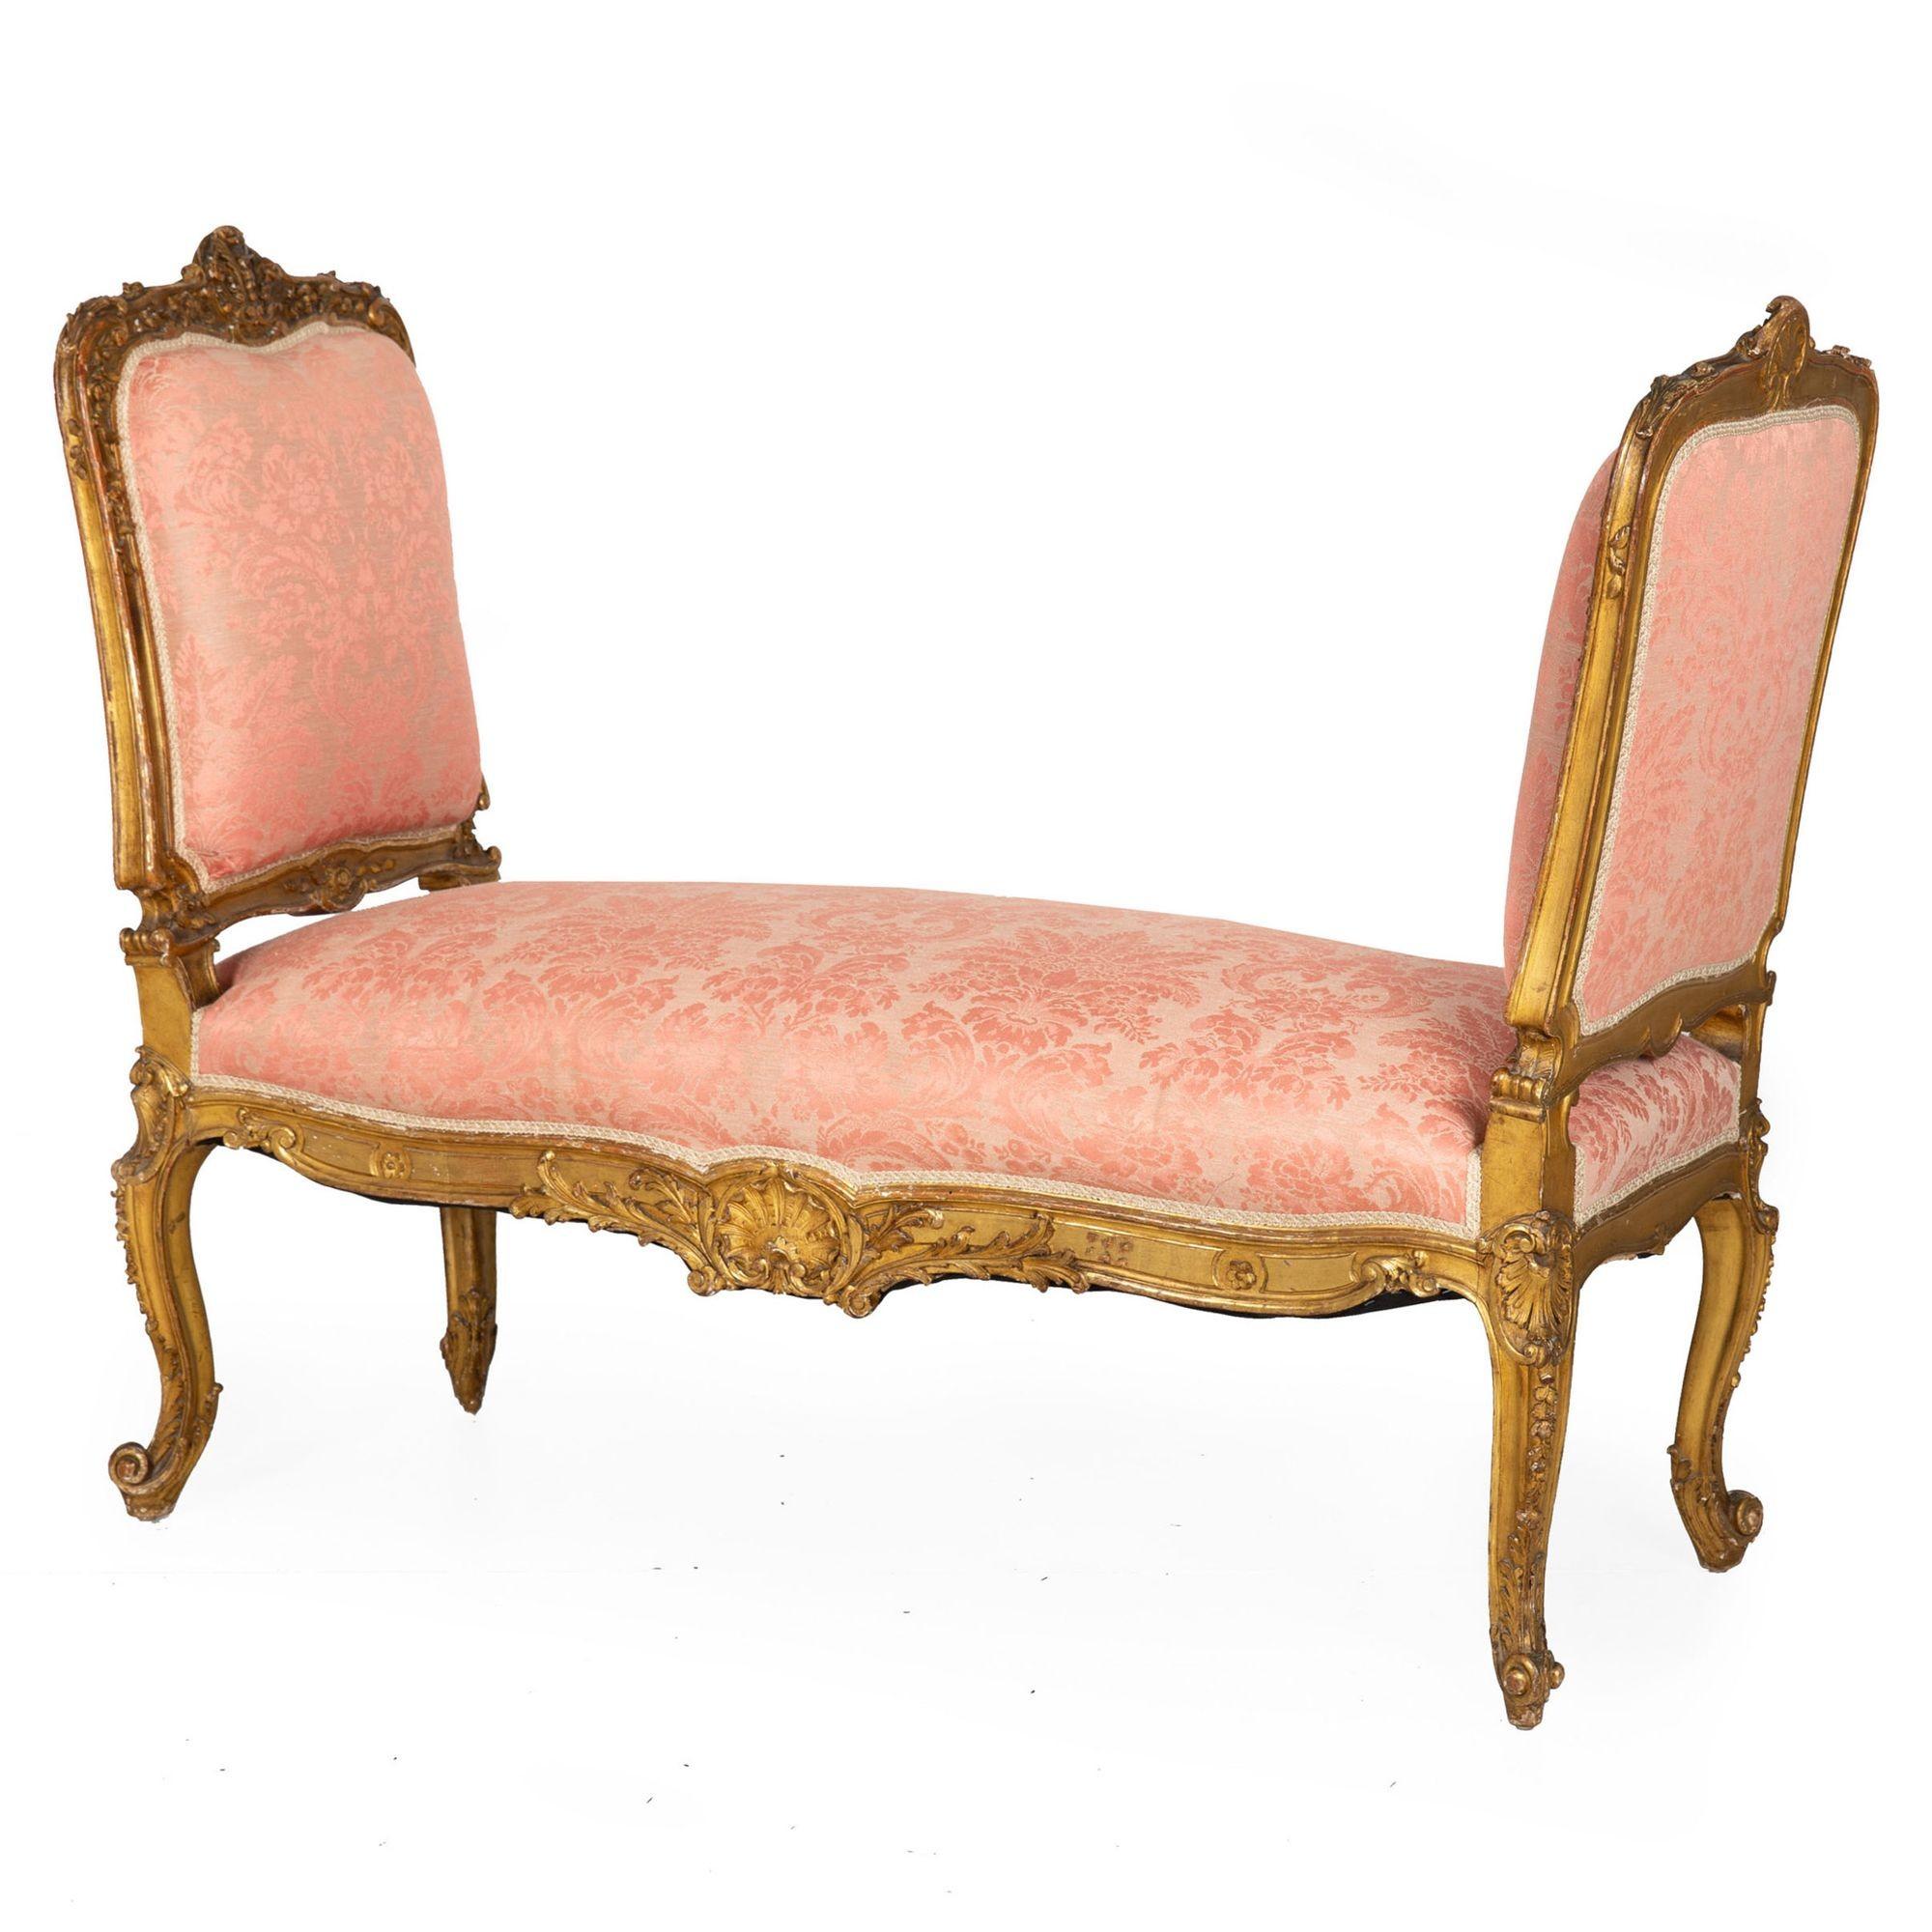 FRENCH LOUIS XV STYLE CARVED GILTWOOD WINDOW BENCH
France, circa late 19th to early 20th century
Item # 306IVB14L 

A very attractive, exquisitely carved and incredibly useful 